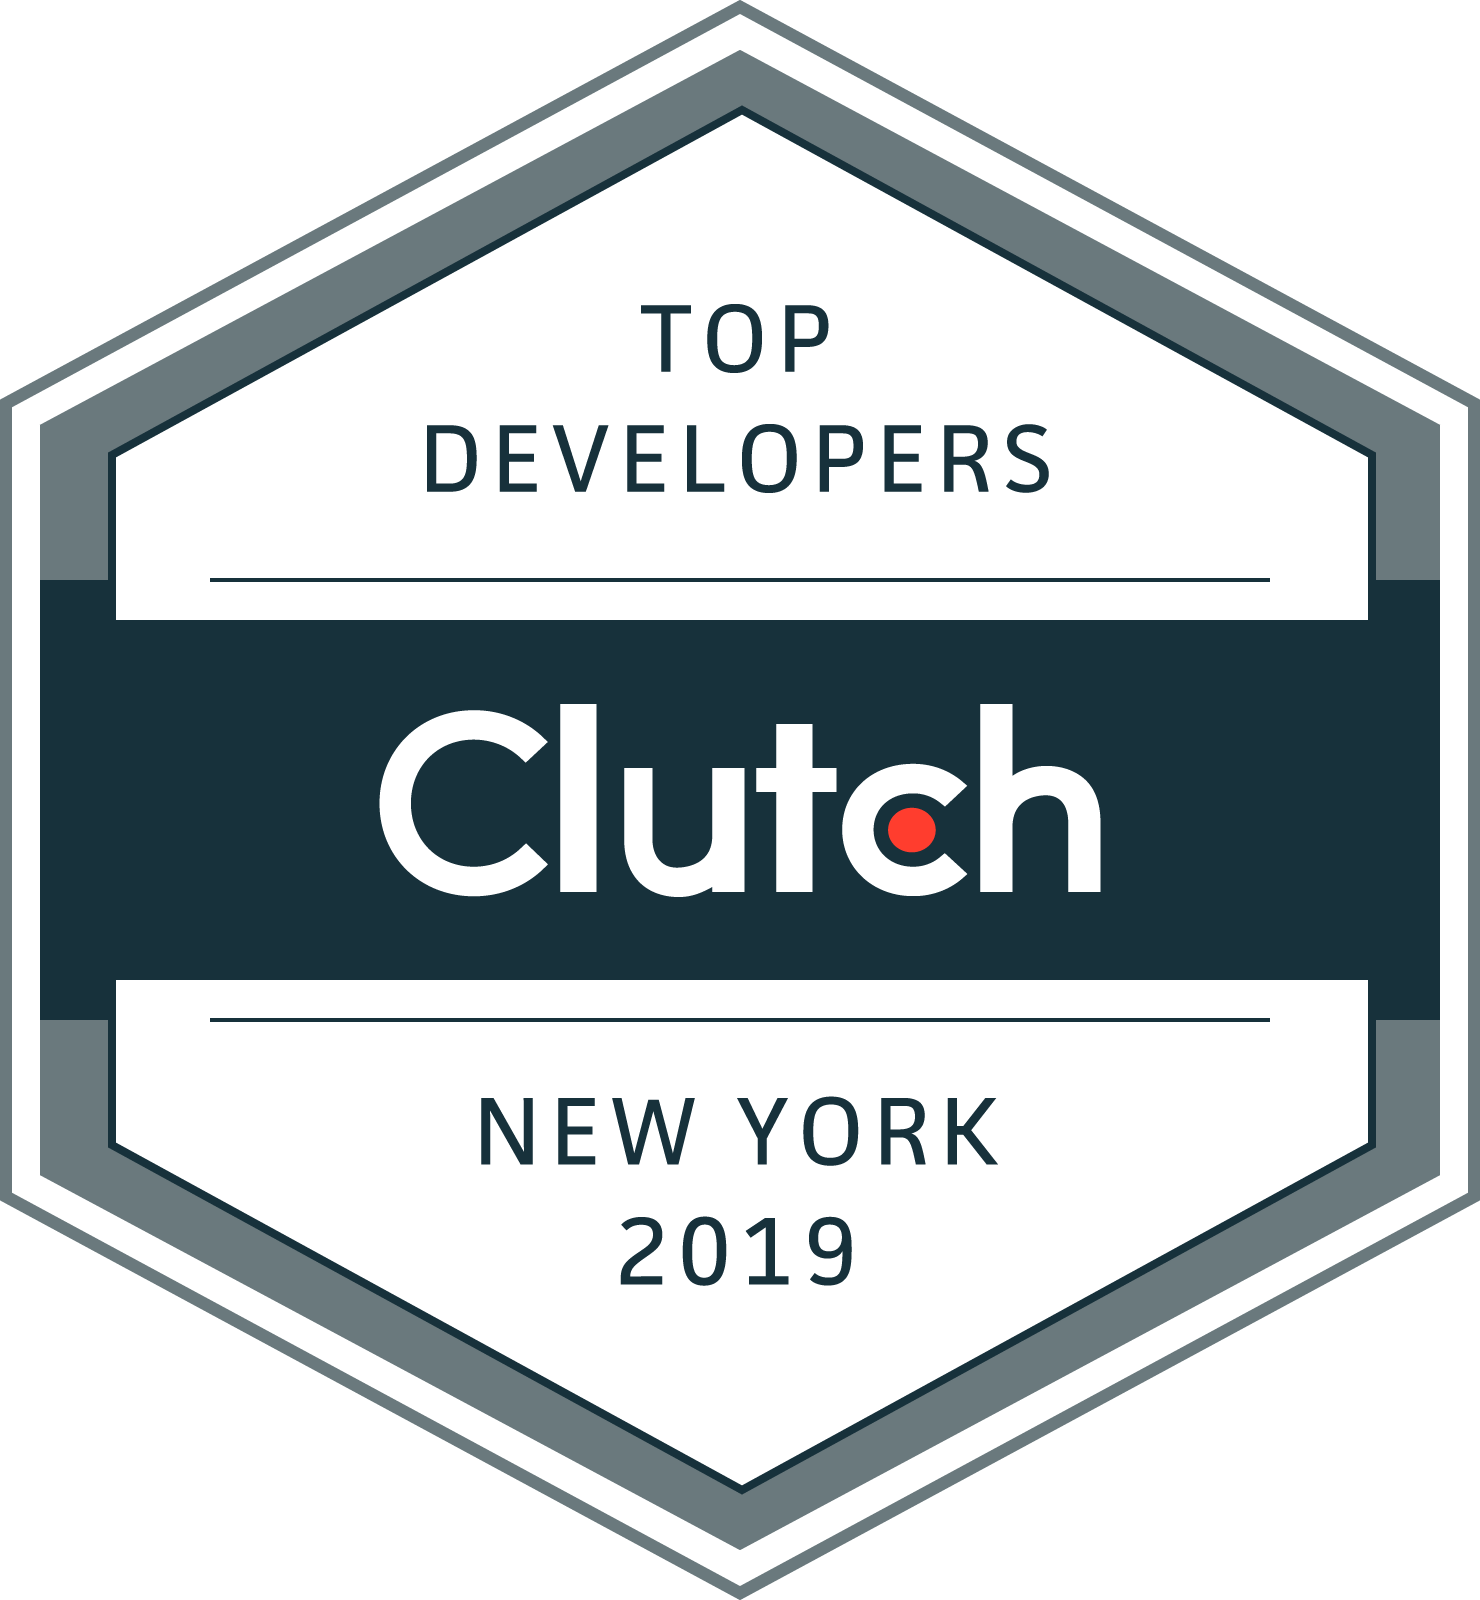 wildcard is a recognized software development agency here in NY!